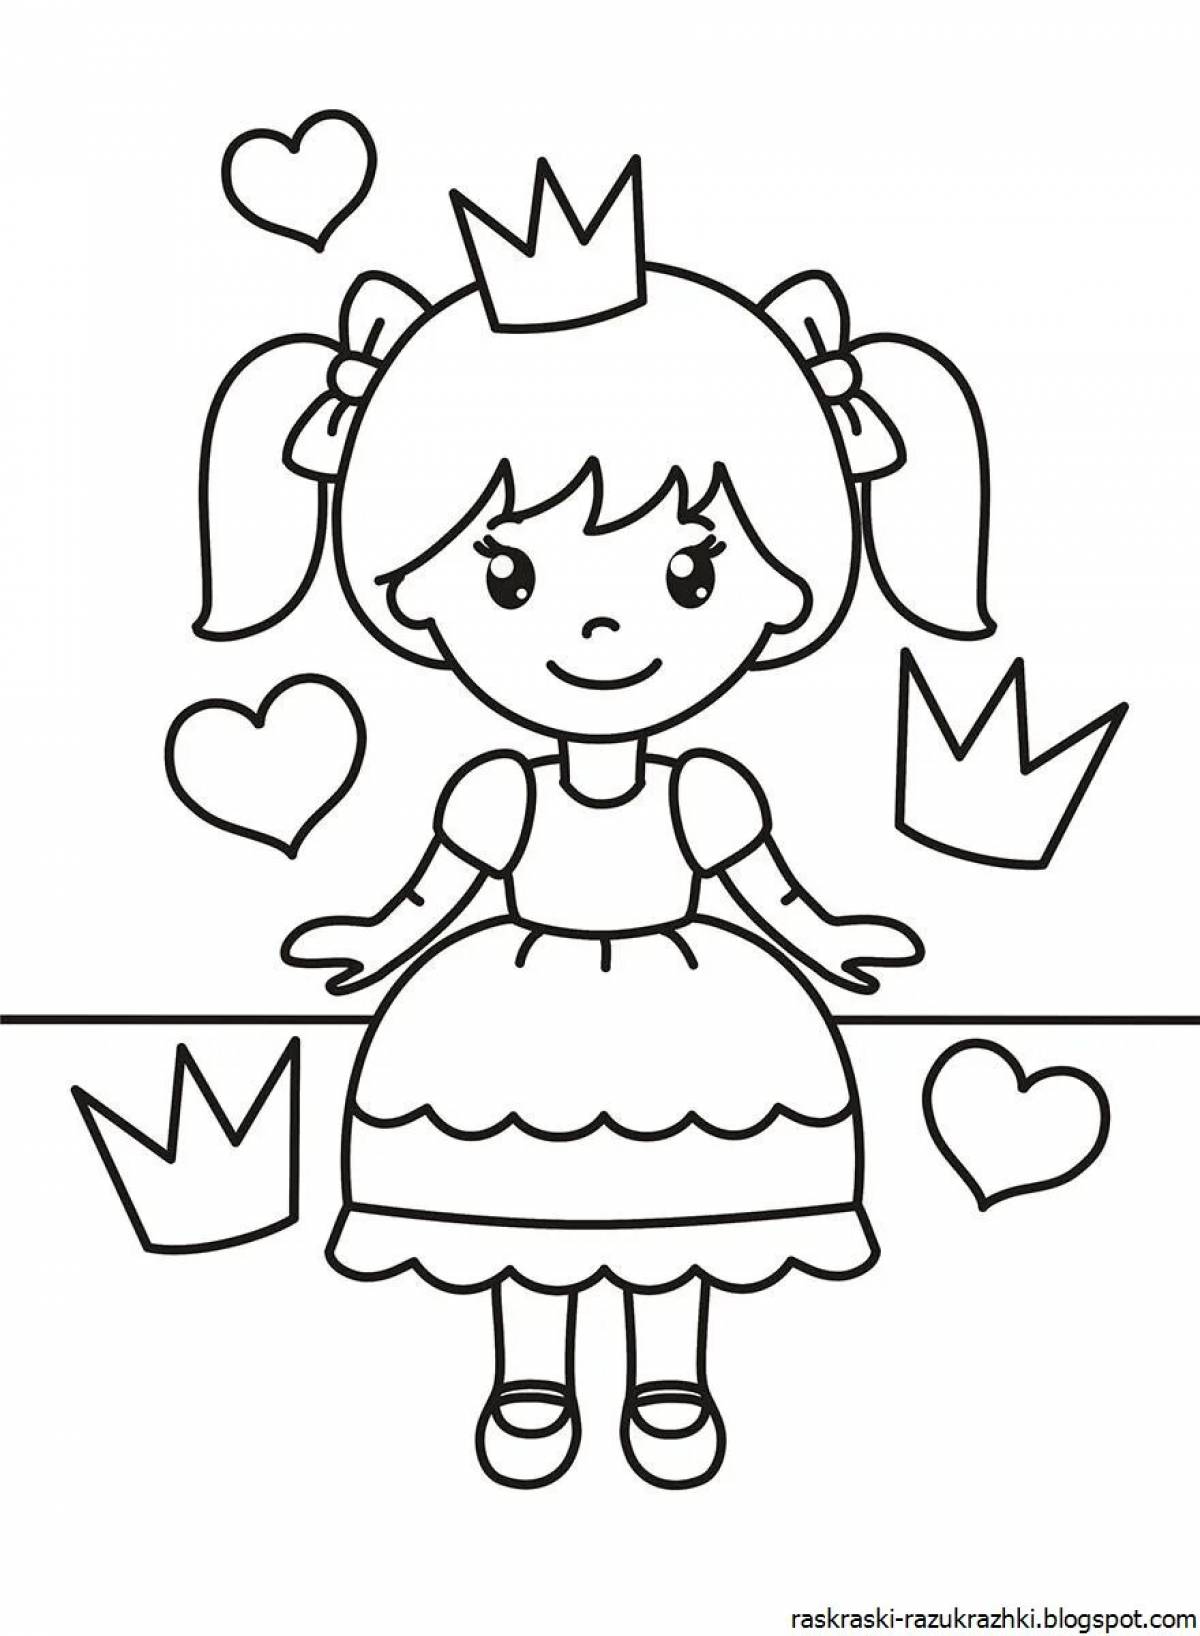 Colourful princess coloring pages for girls 4 years old